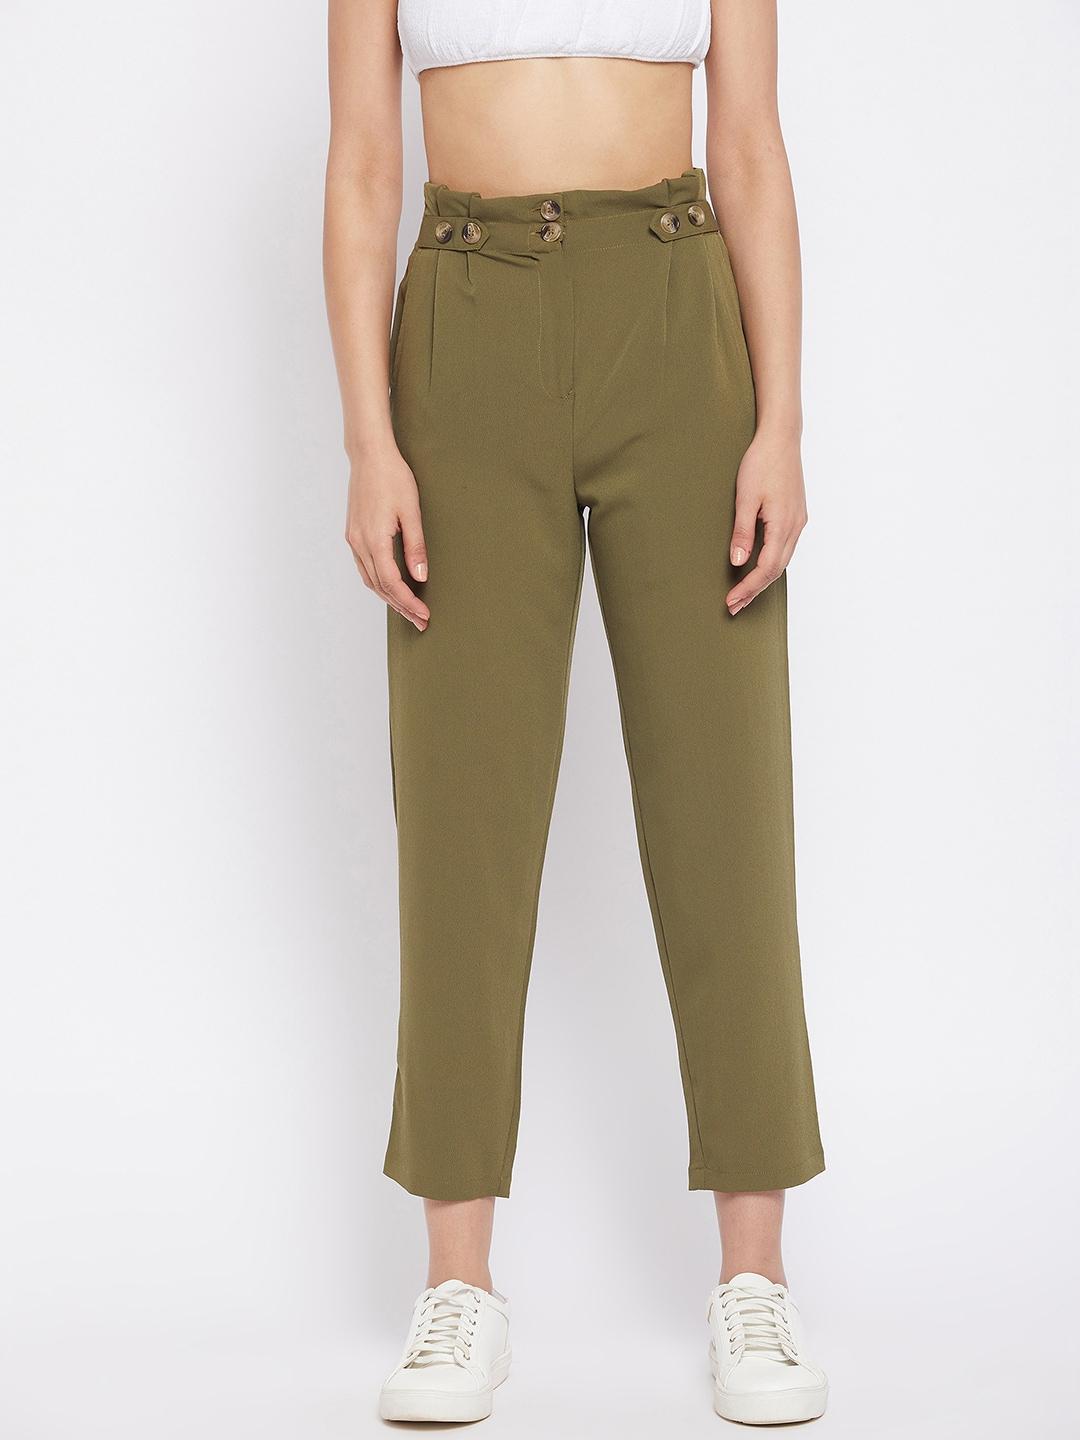 winered-women-olive-green-high-rise-easy-wash-pleated-trousers